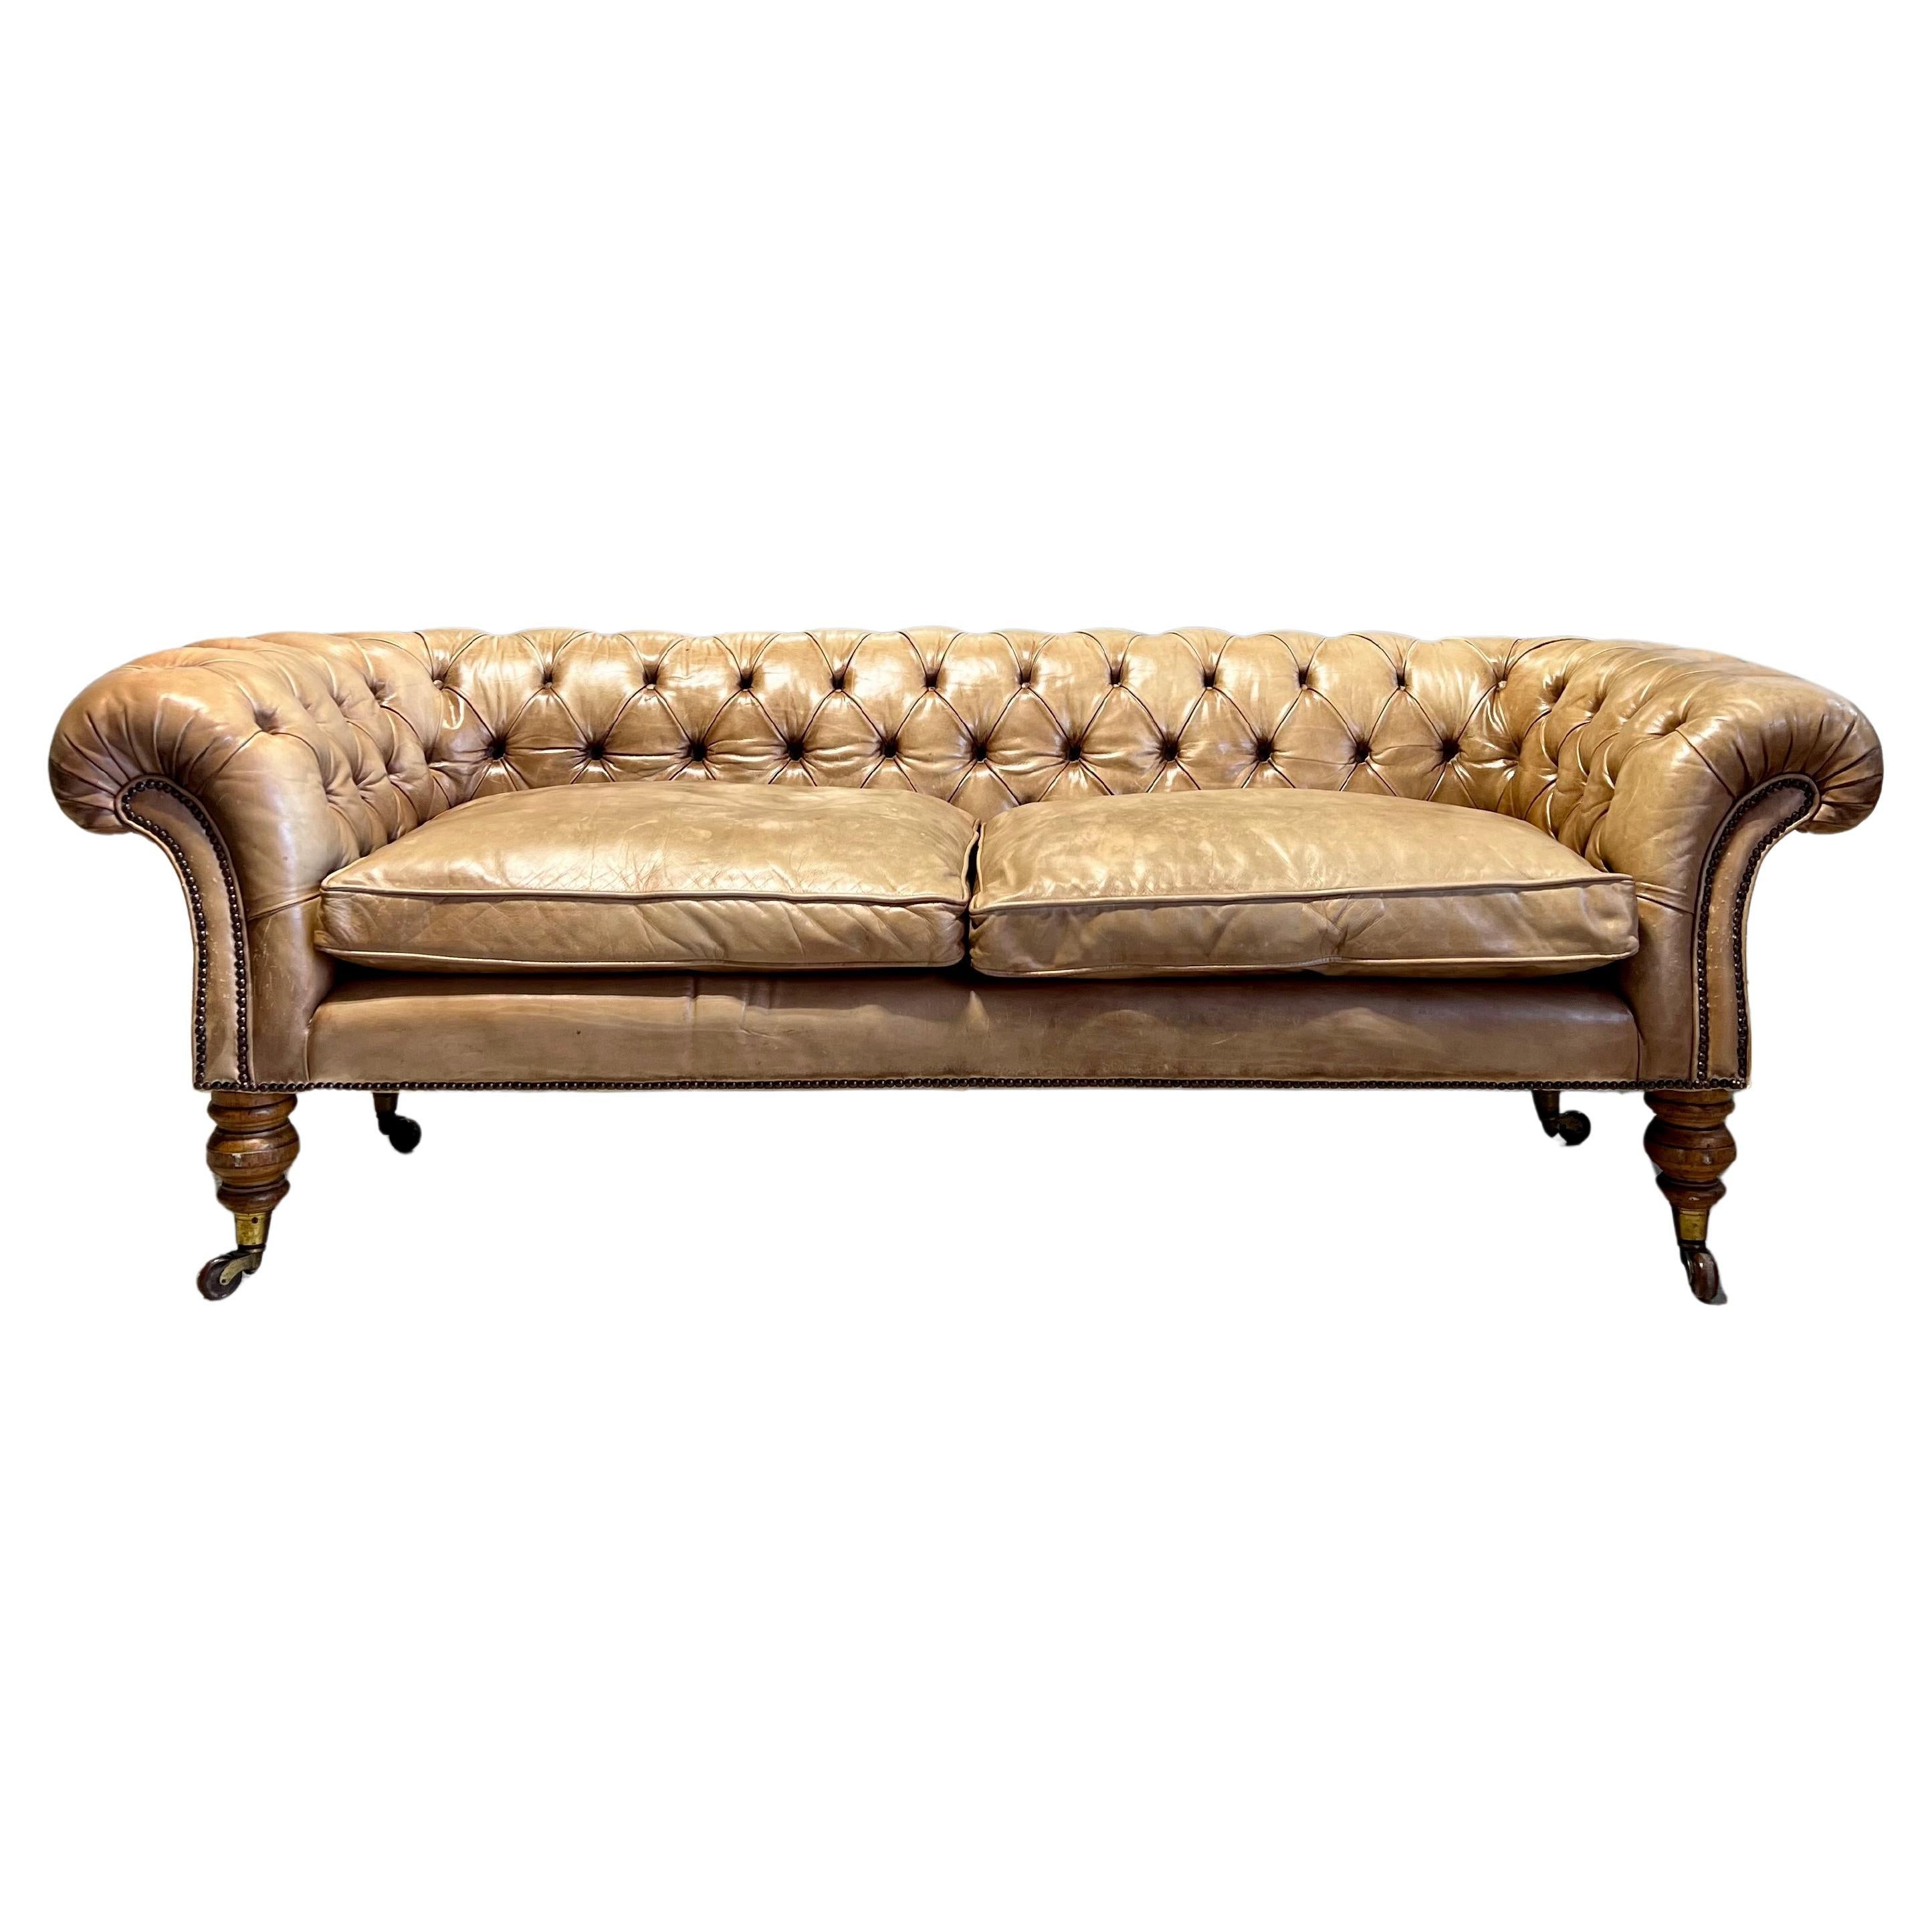 Antique 19thC Chesterfield Sofa in Hand Dyed Parchment Leather For Sale